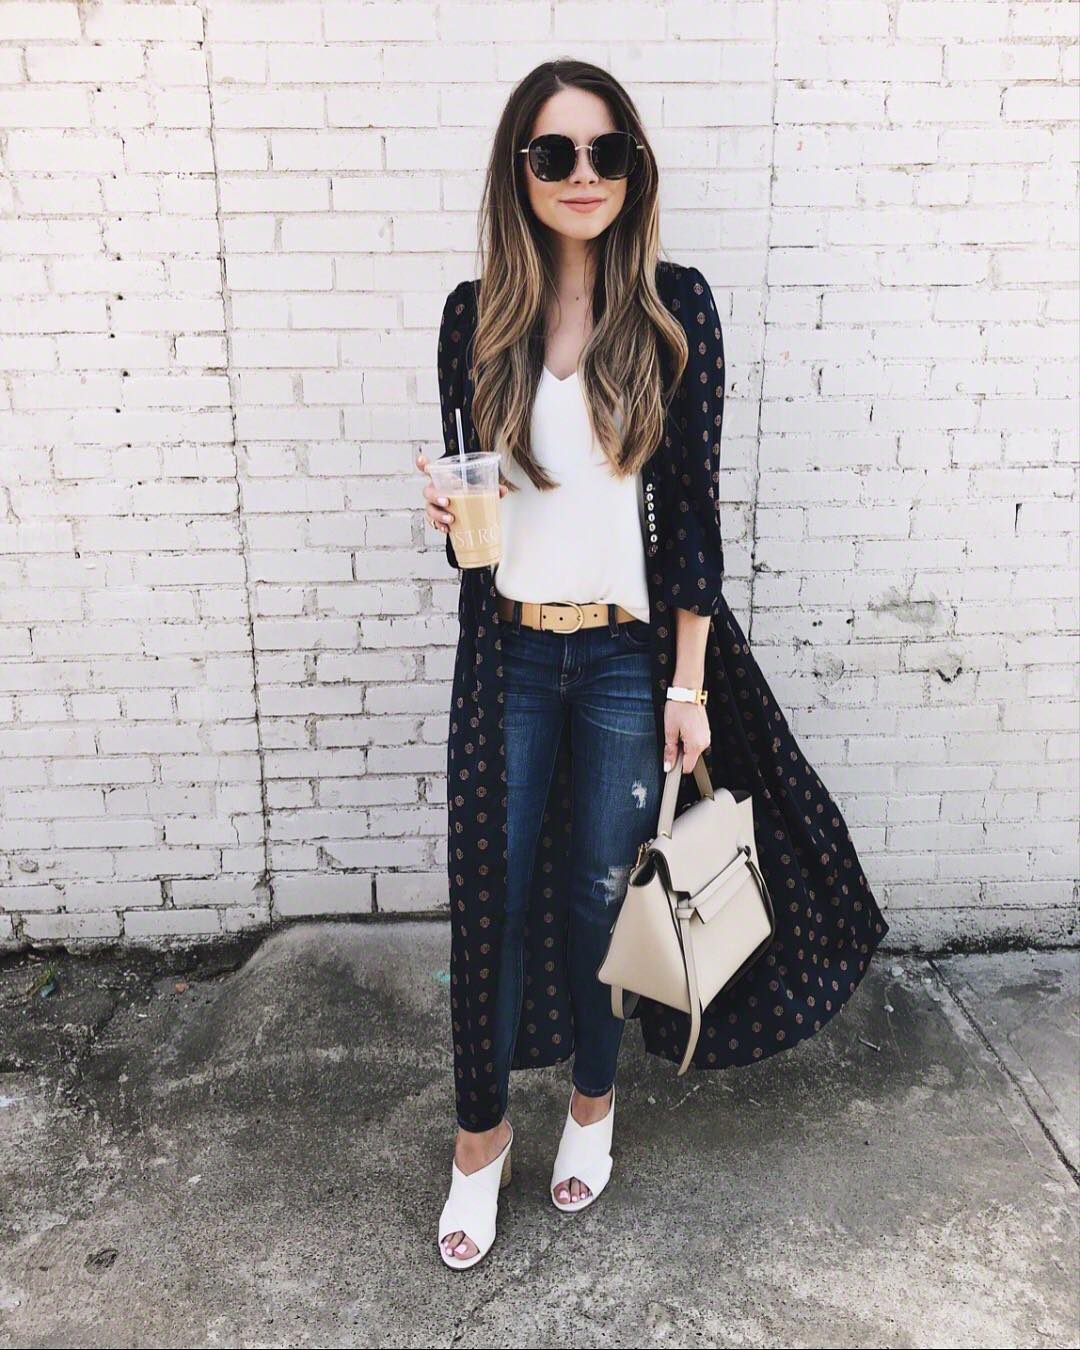 IG Lately No. 22 | The Teacher Diva: a Dallas Fashion Blog featuring ...